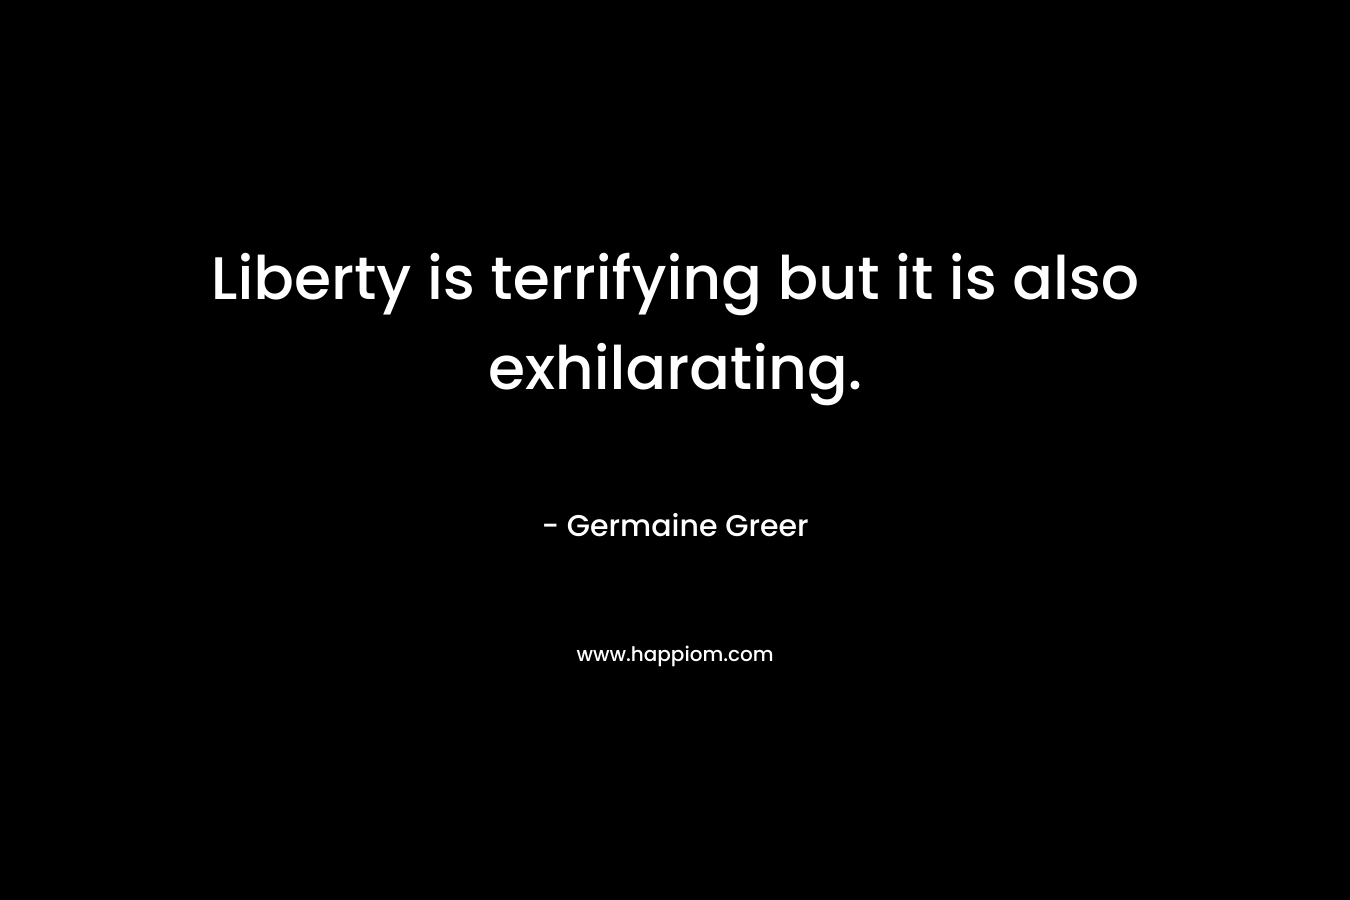 Liberty is terrifying but it is also exhilarating.